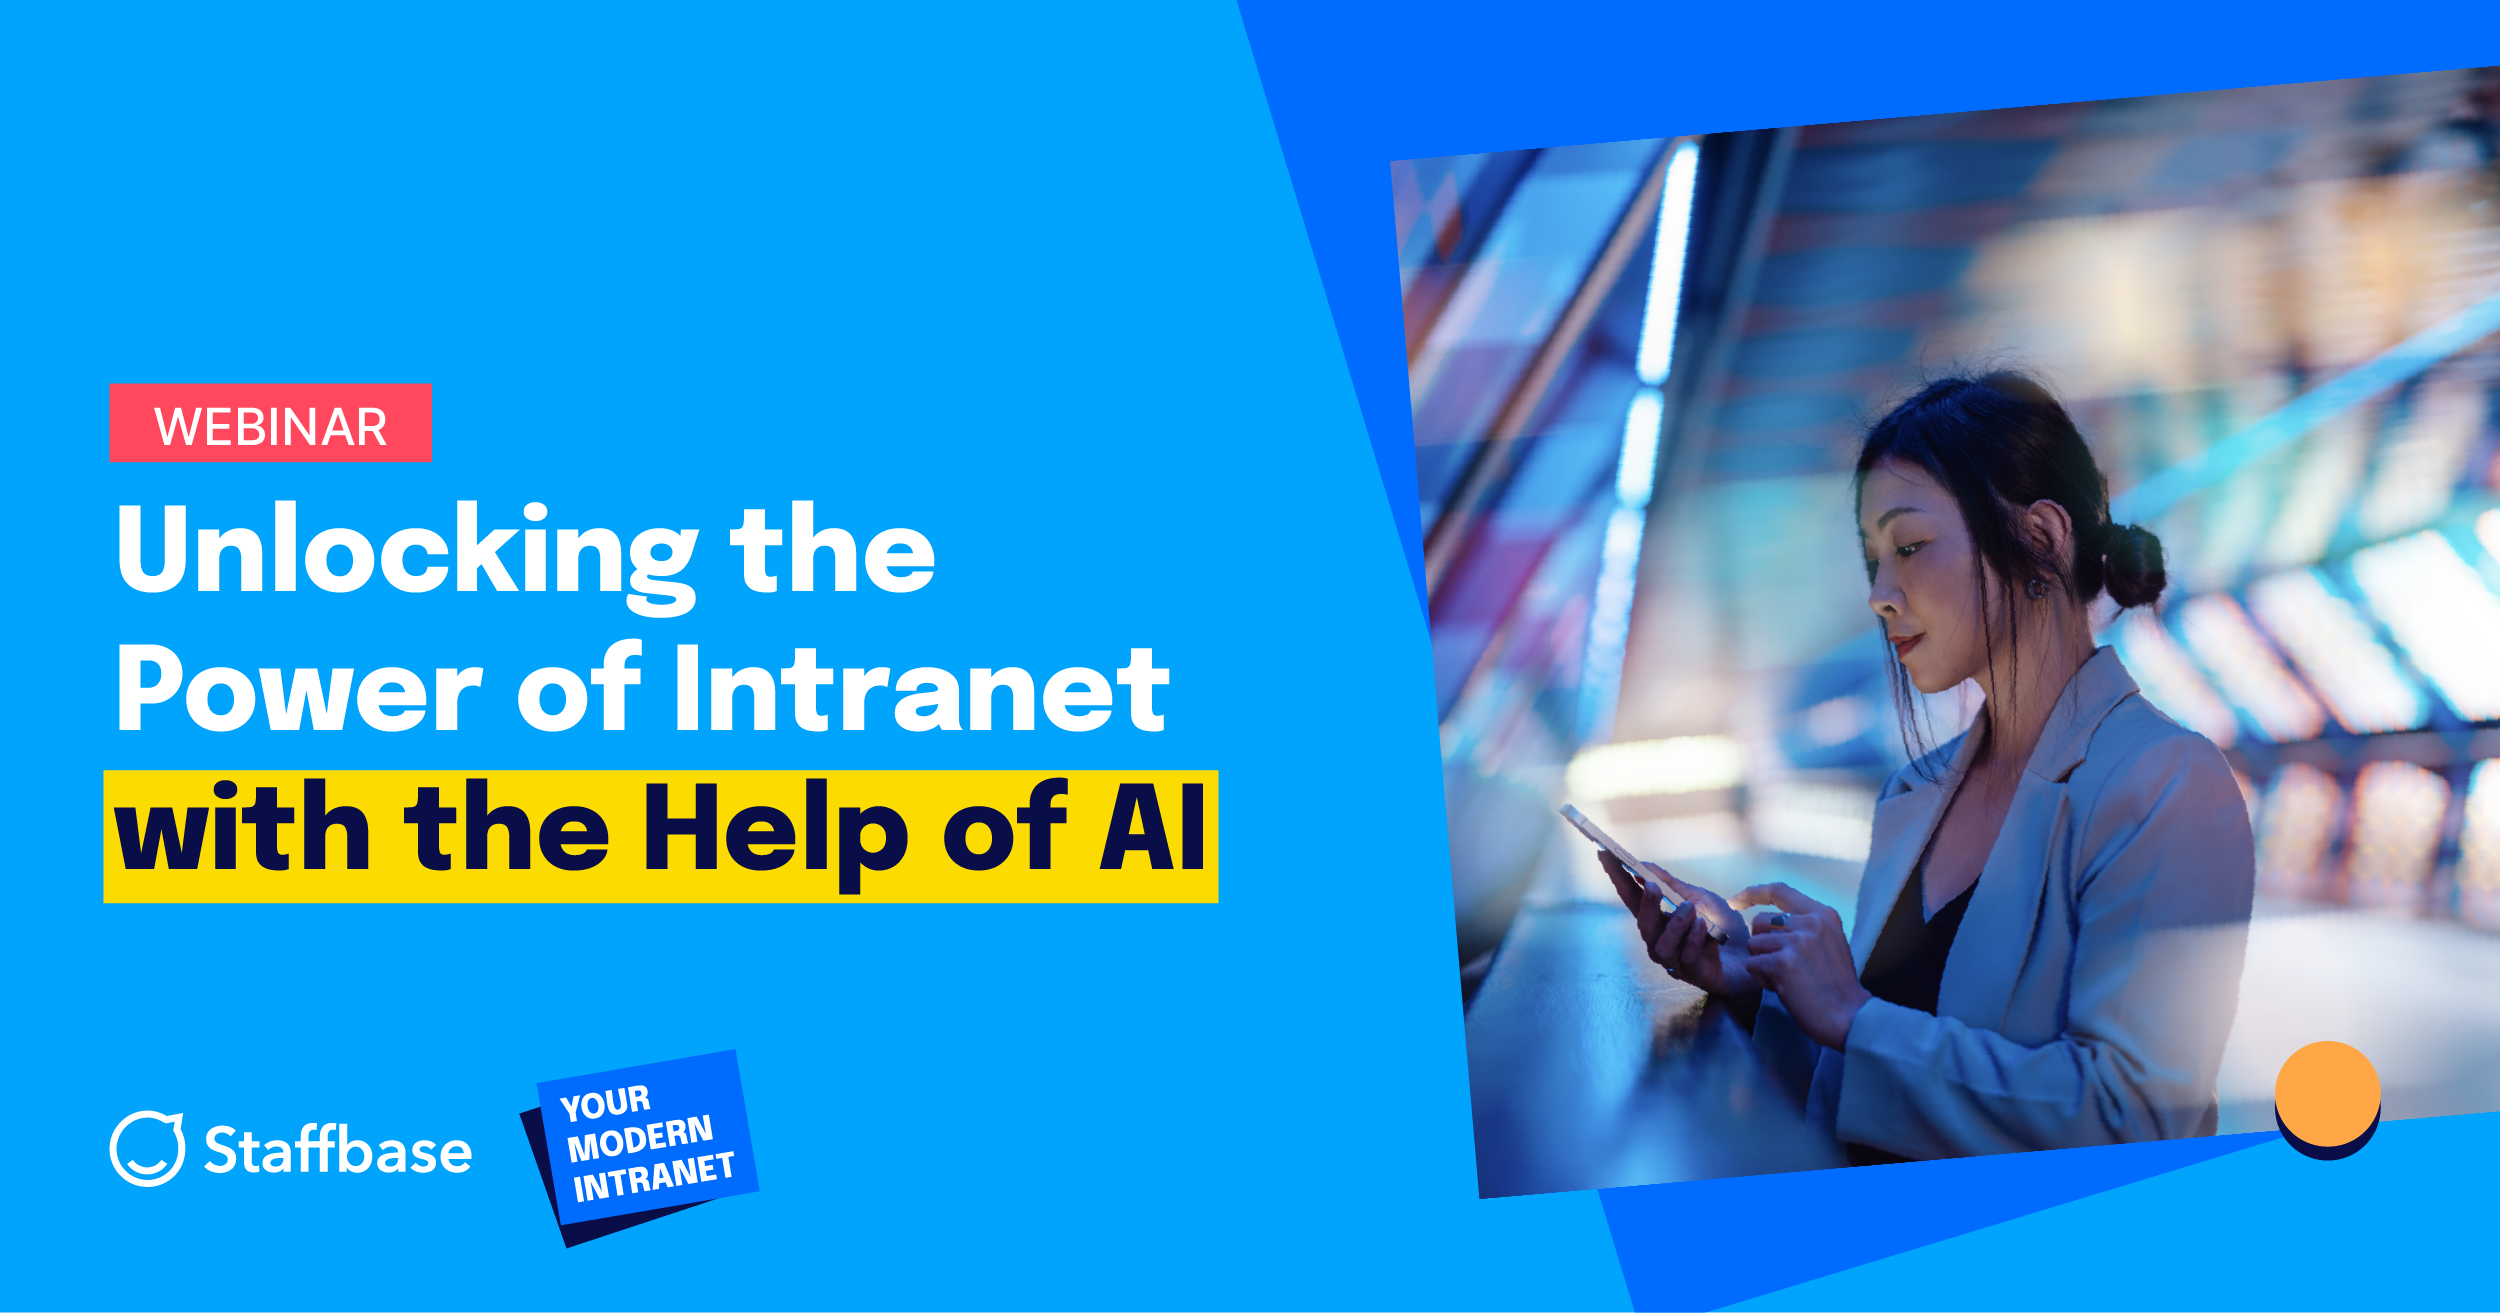 Webinar NA_Unlocking the Power of Intranet with the Help of AI 270723_1200x630px nodate